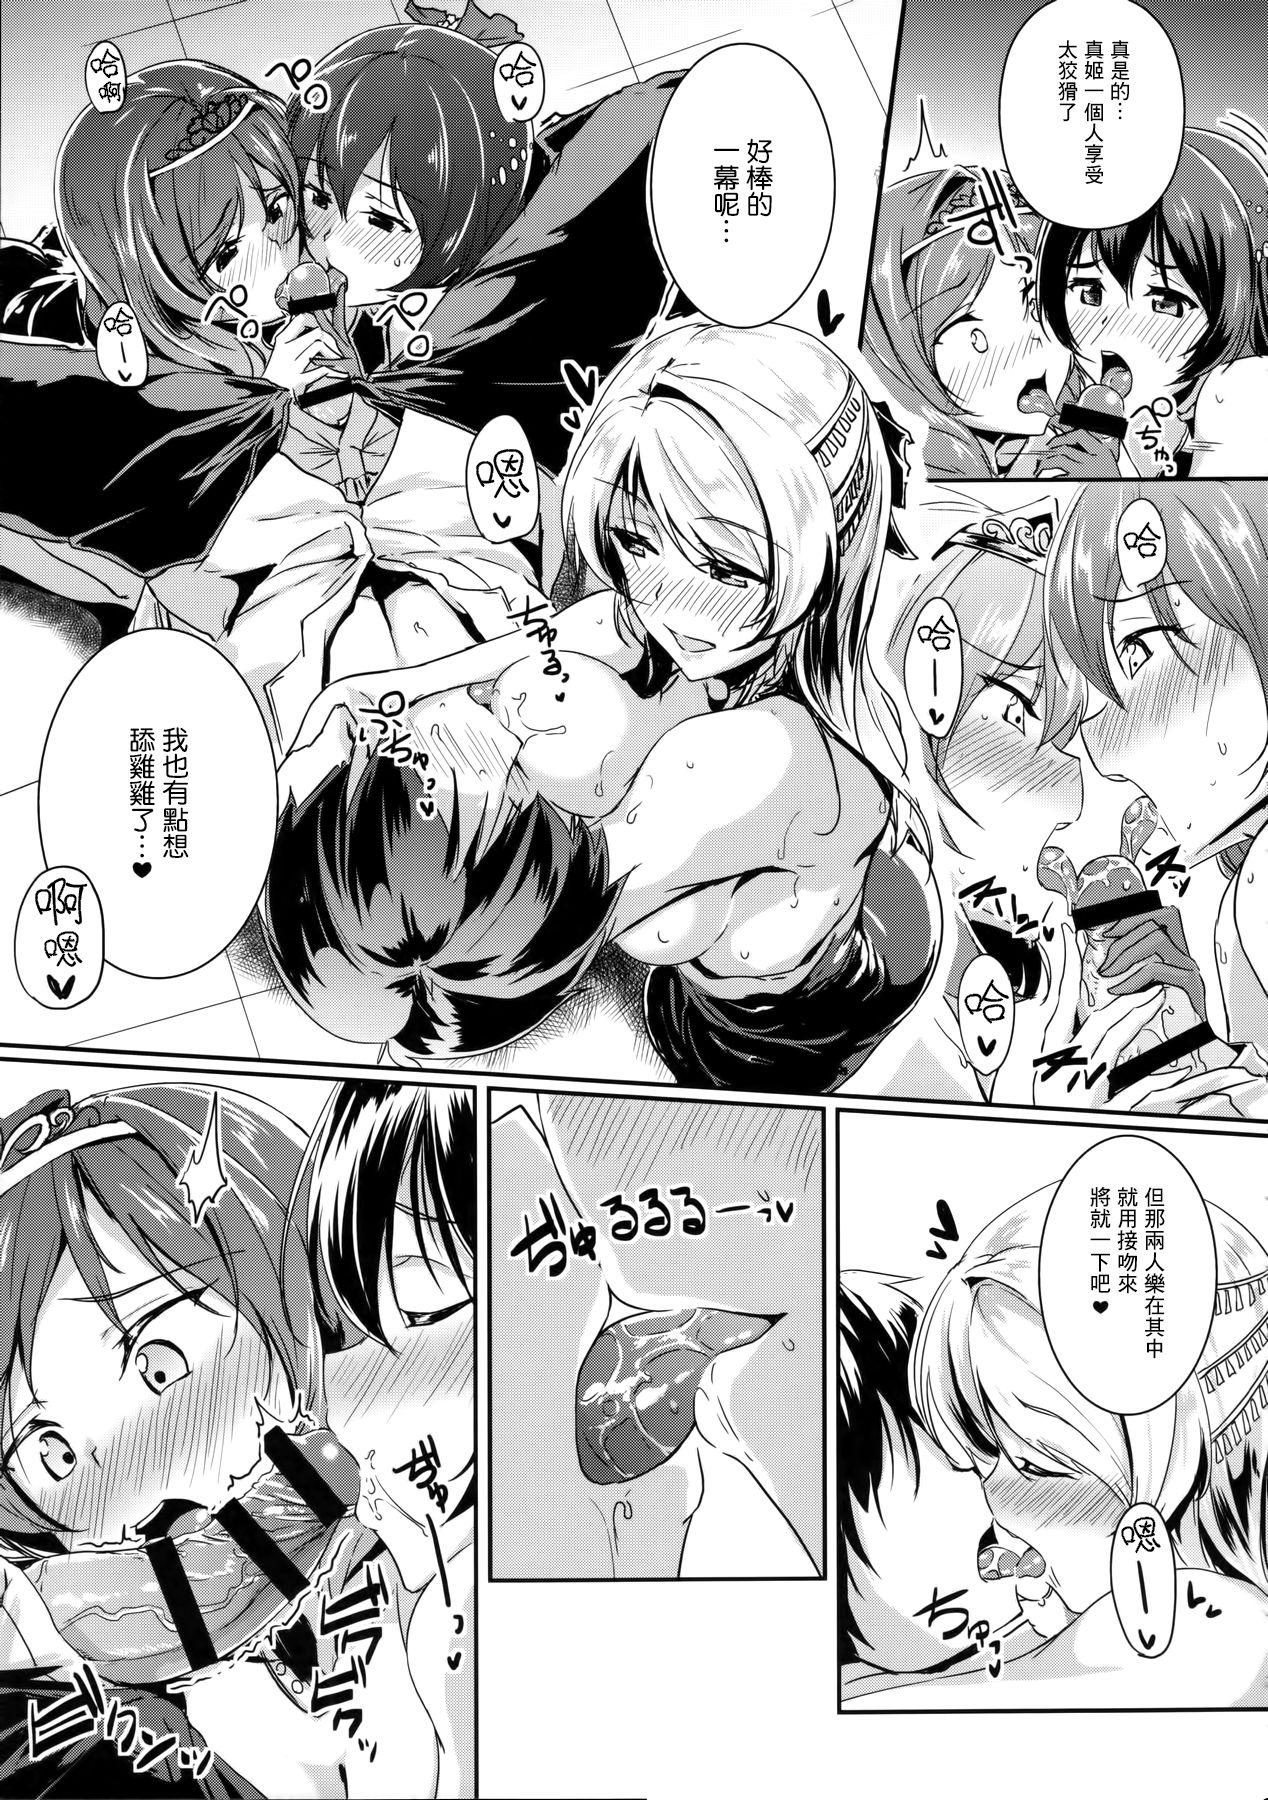 Rope secret in my heart - Love live Thief - Page 8